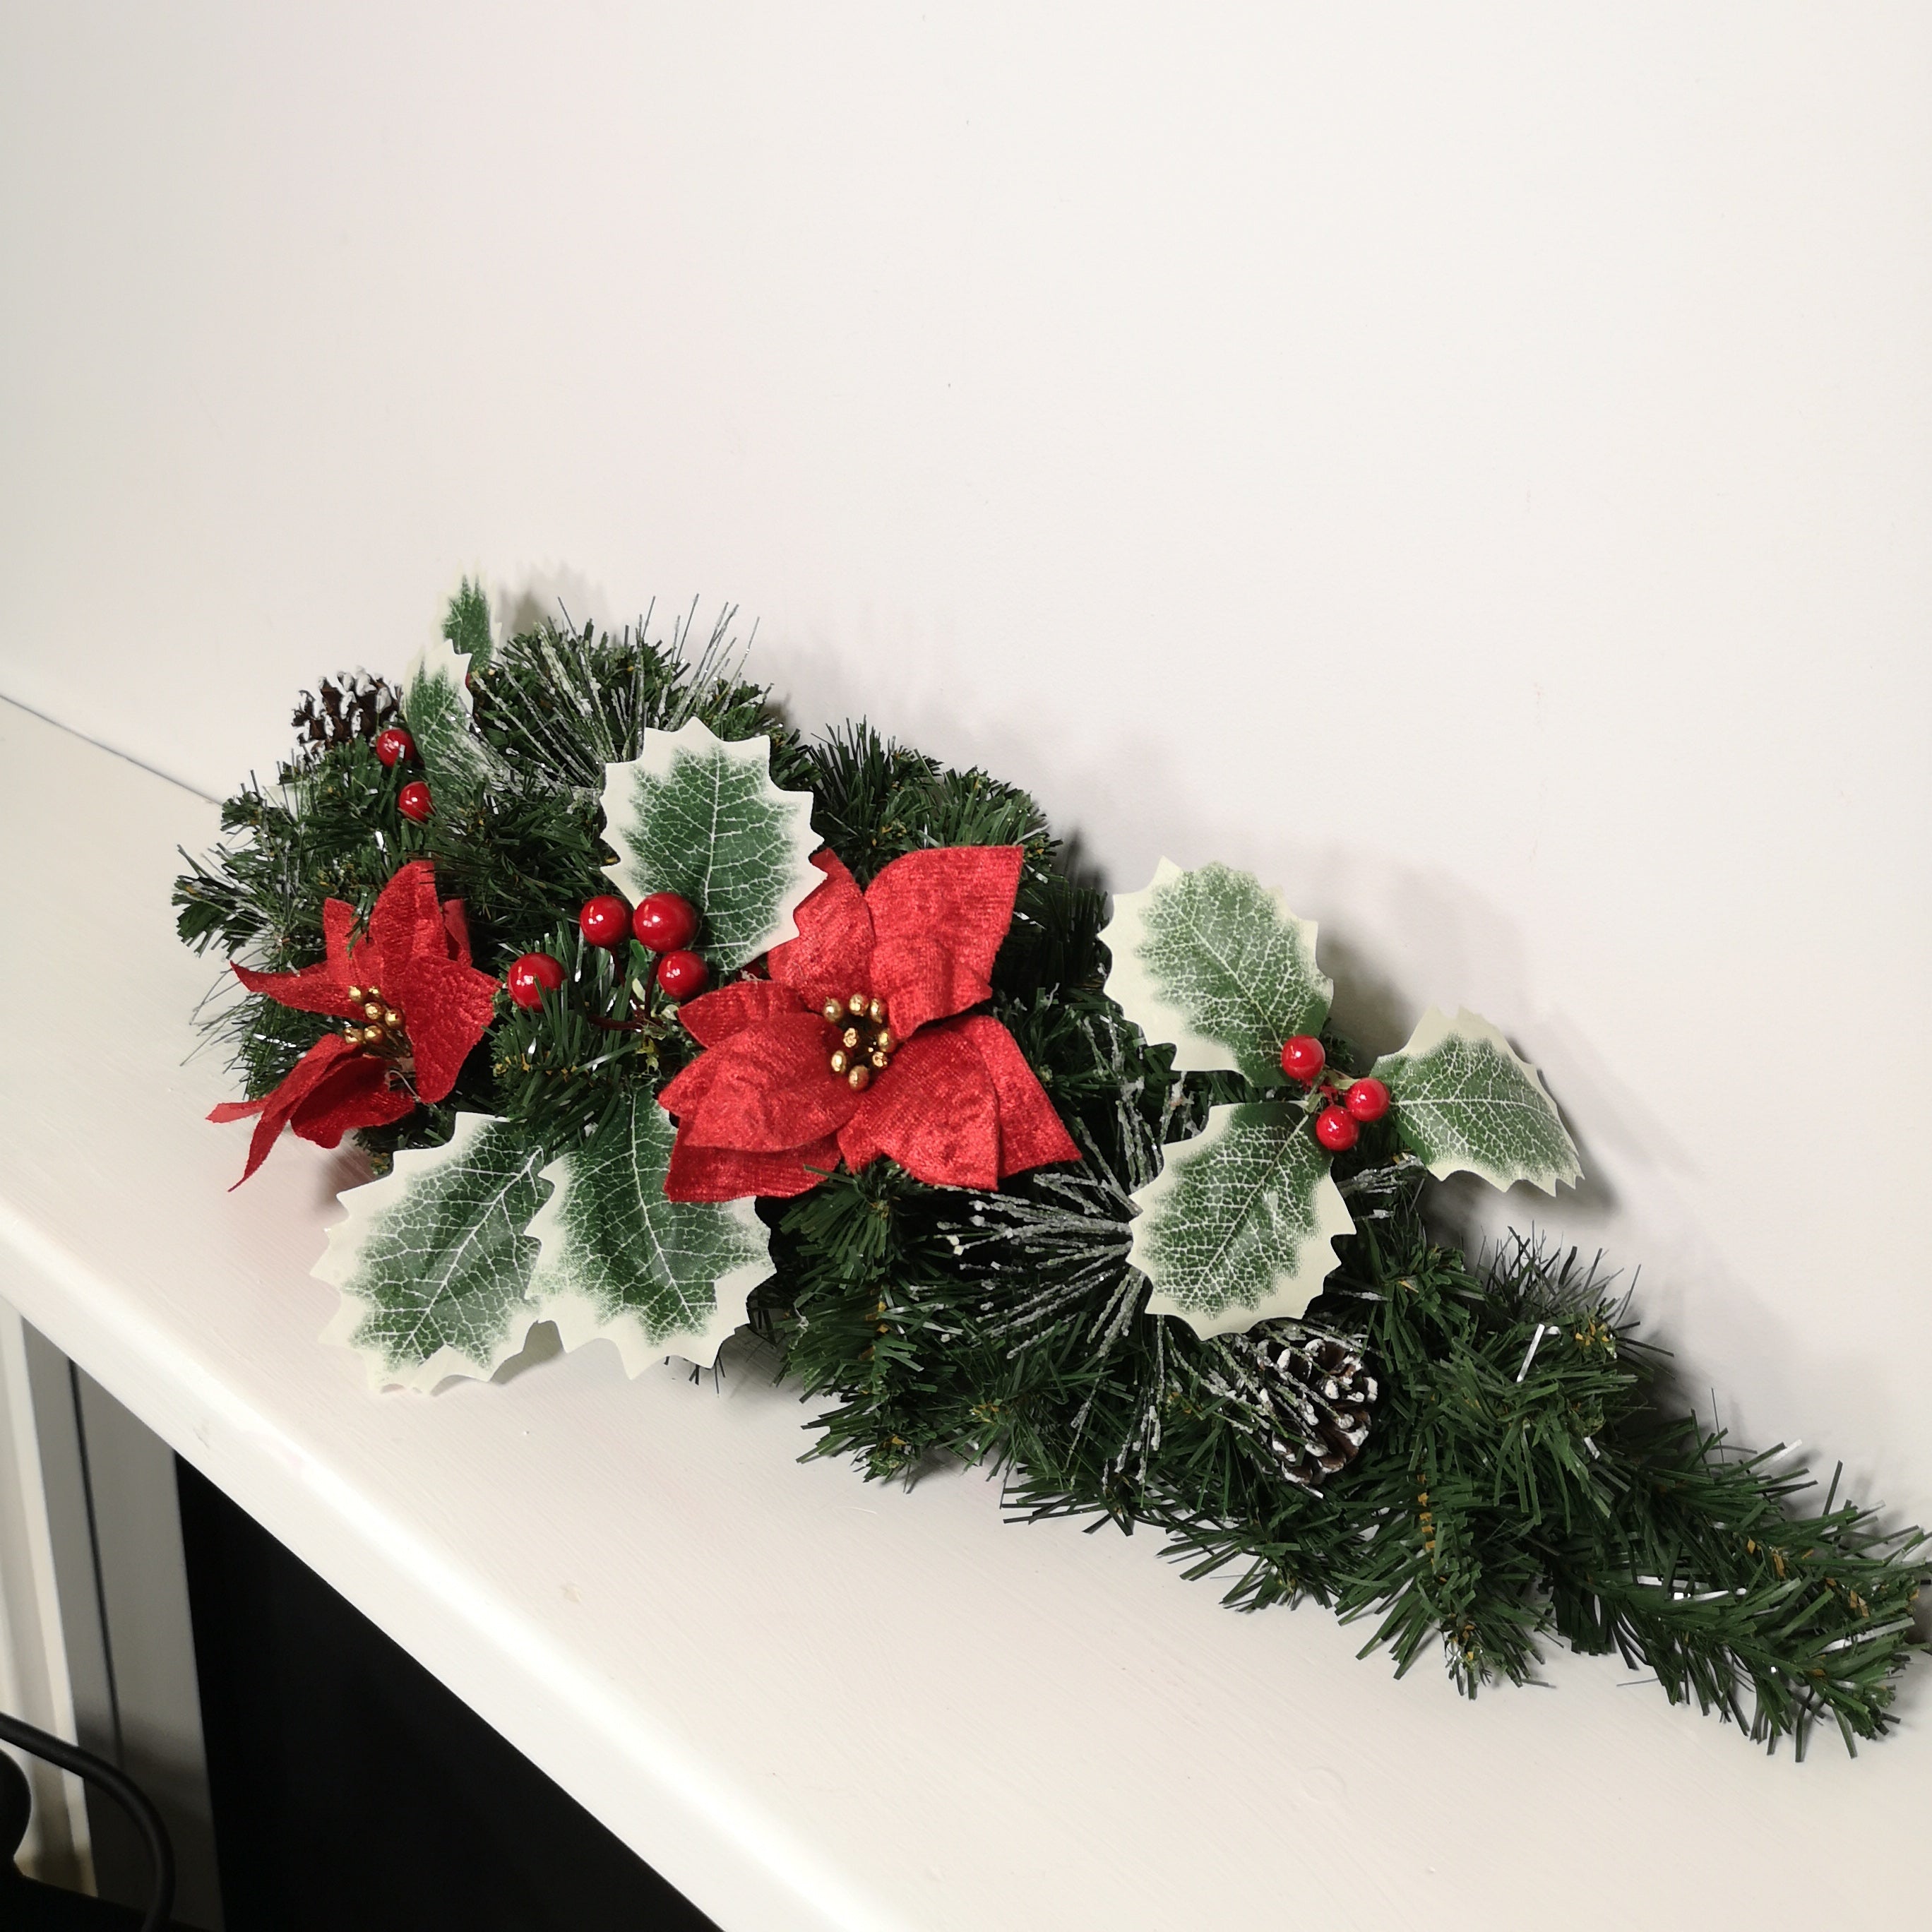 60cm Christmas Swag with Poinsettia and Holly Leaves / Berries